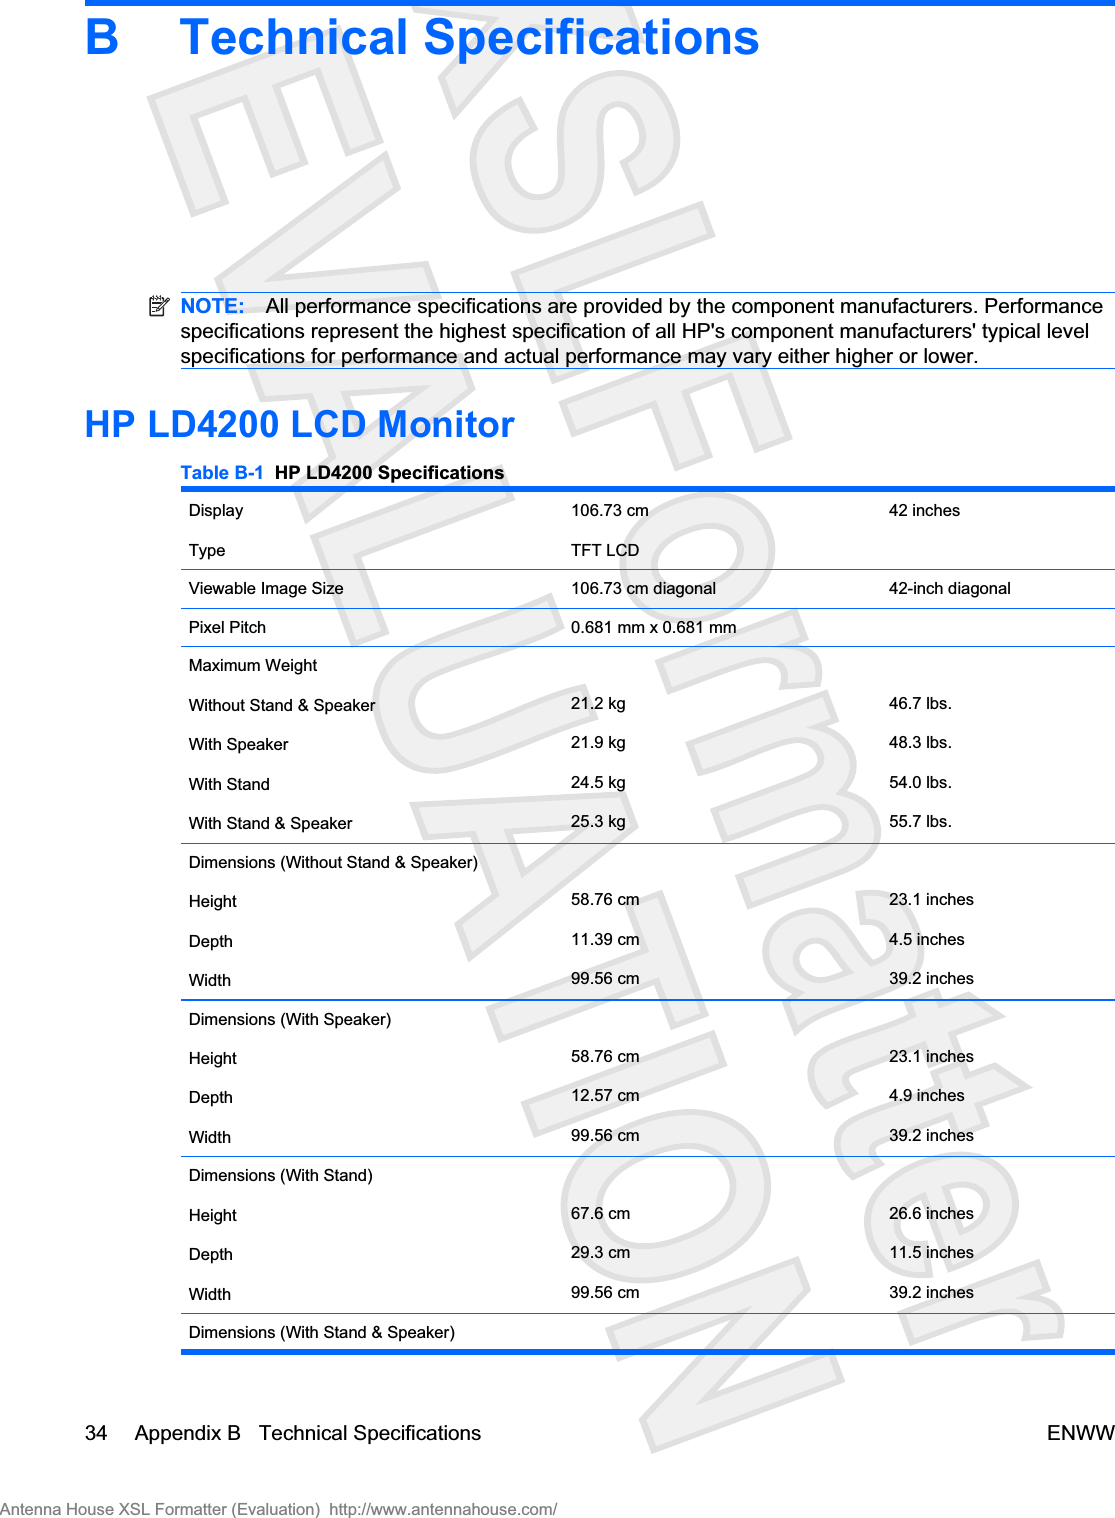 B Technical SpecificationsNOTE: All performance specifications are provided by the component manufacturers. Performancespecifications represent the highest specification of all HP&apos;s component manufacturers&apos; typical levelspecifications for performance and actual performance may vary either higher or lower.HP LD4200 LCD MonitorTable B-1  HP LD4200 SpecificationsDisplayType106.73 cmTFT LCD42 inchesViewable Image Size 106.73 cm diagonal 42-inch diagonalPixel Pitch 0.681 mm x 0.681 mmMaximum WeightWithout Stand &amp; SpeakerWith SpeakerWith StandWith Stand &amp; Speaker21.2 kg21.9 kg24.5 kg25.3 kg46.7 lbs.48.3 lbs.54.0 lbs.55.7 lbs.Dimensions (Without Stand &amp; Speaker)HeightDepthWidth58.76 cm11.39 cm99.56 cm23.1 inches4.5 inches39.2 inchesDimensions (With Speaker)HeightDepthWidth58.76 cm12.57 cm99.56 cm23.1 inches4.9 inches39.2 inchesDimensions (With Stand)HeightDepthWidth67.6 cm29.3 cm99.56 cm26.6 inches11.5 inches39.2 inchesDimensions (With Stand &amp; Speaker)34 Appendix B   Technical Specifications ENWWAntenna House XSL Formatter (Evaluation)  http://www.antennahouse.com/